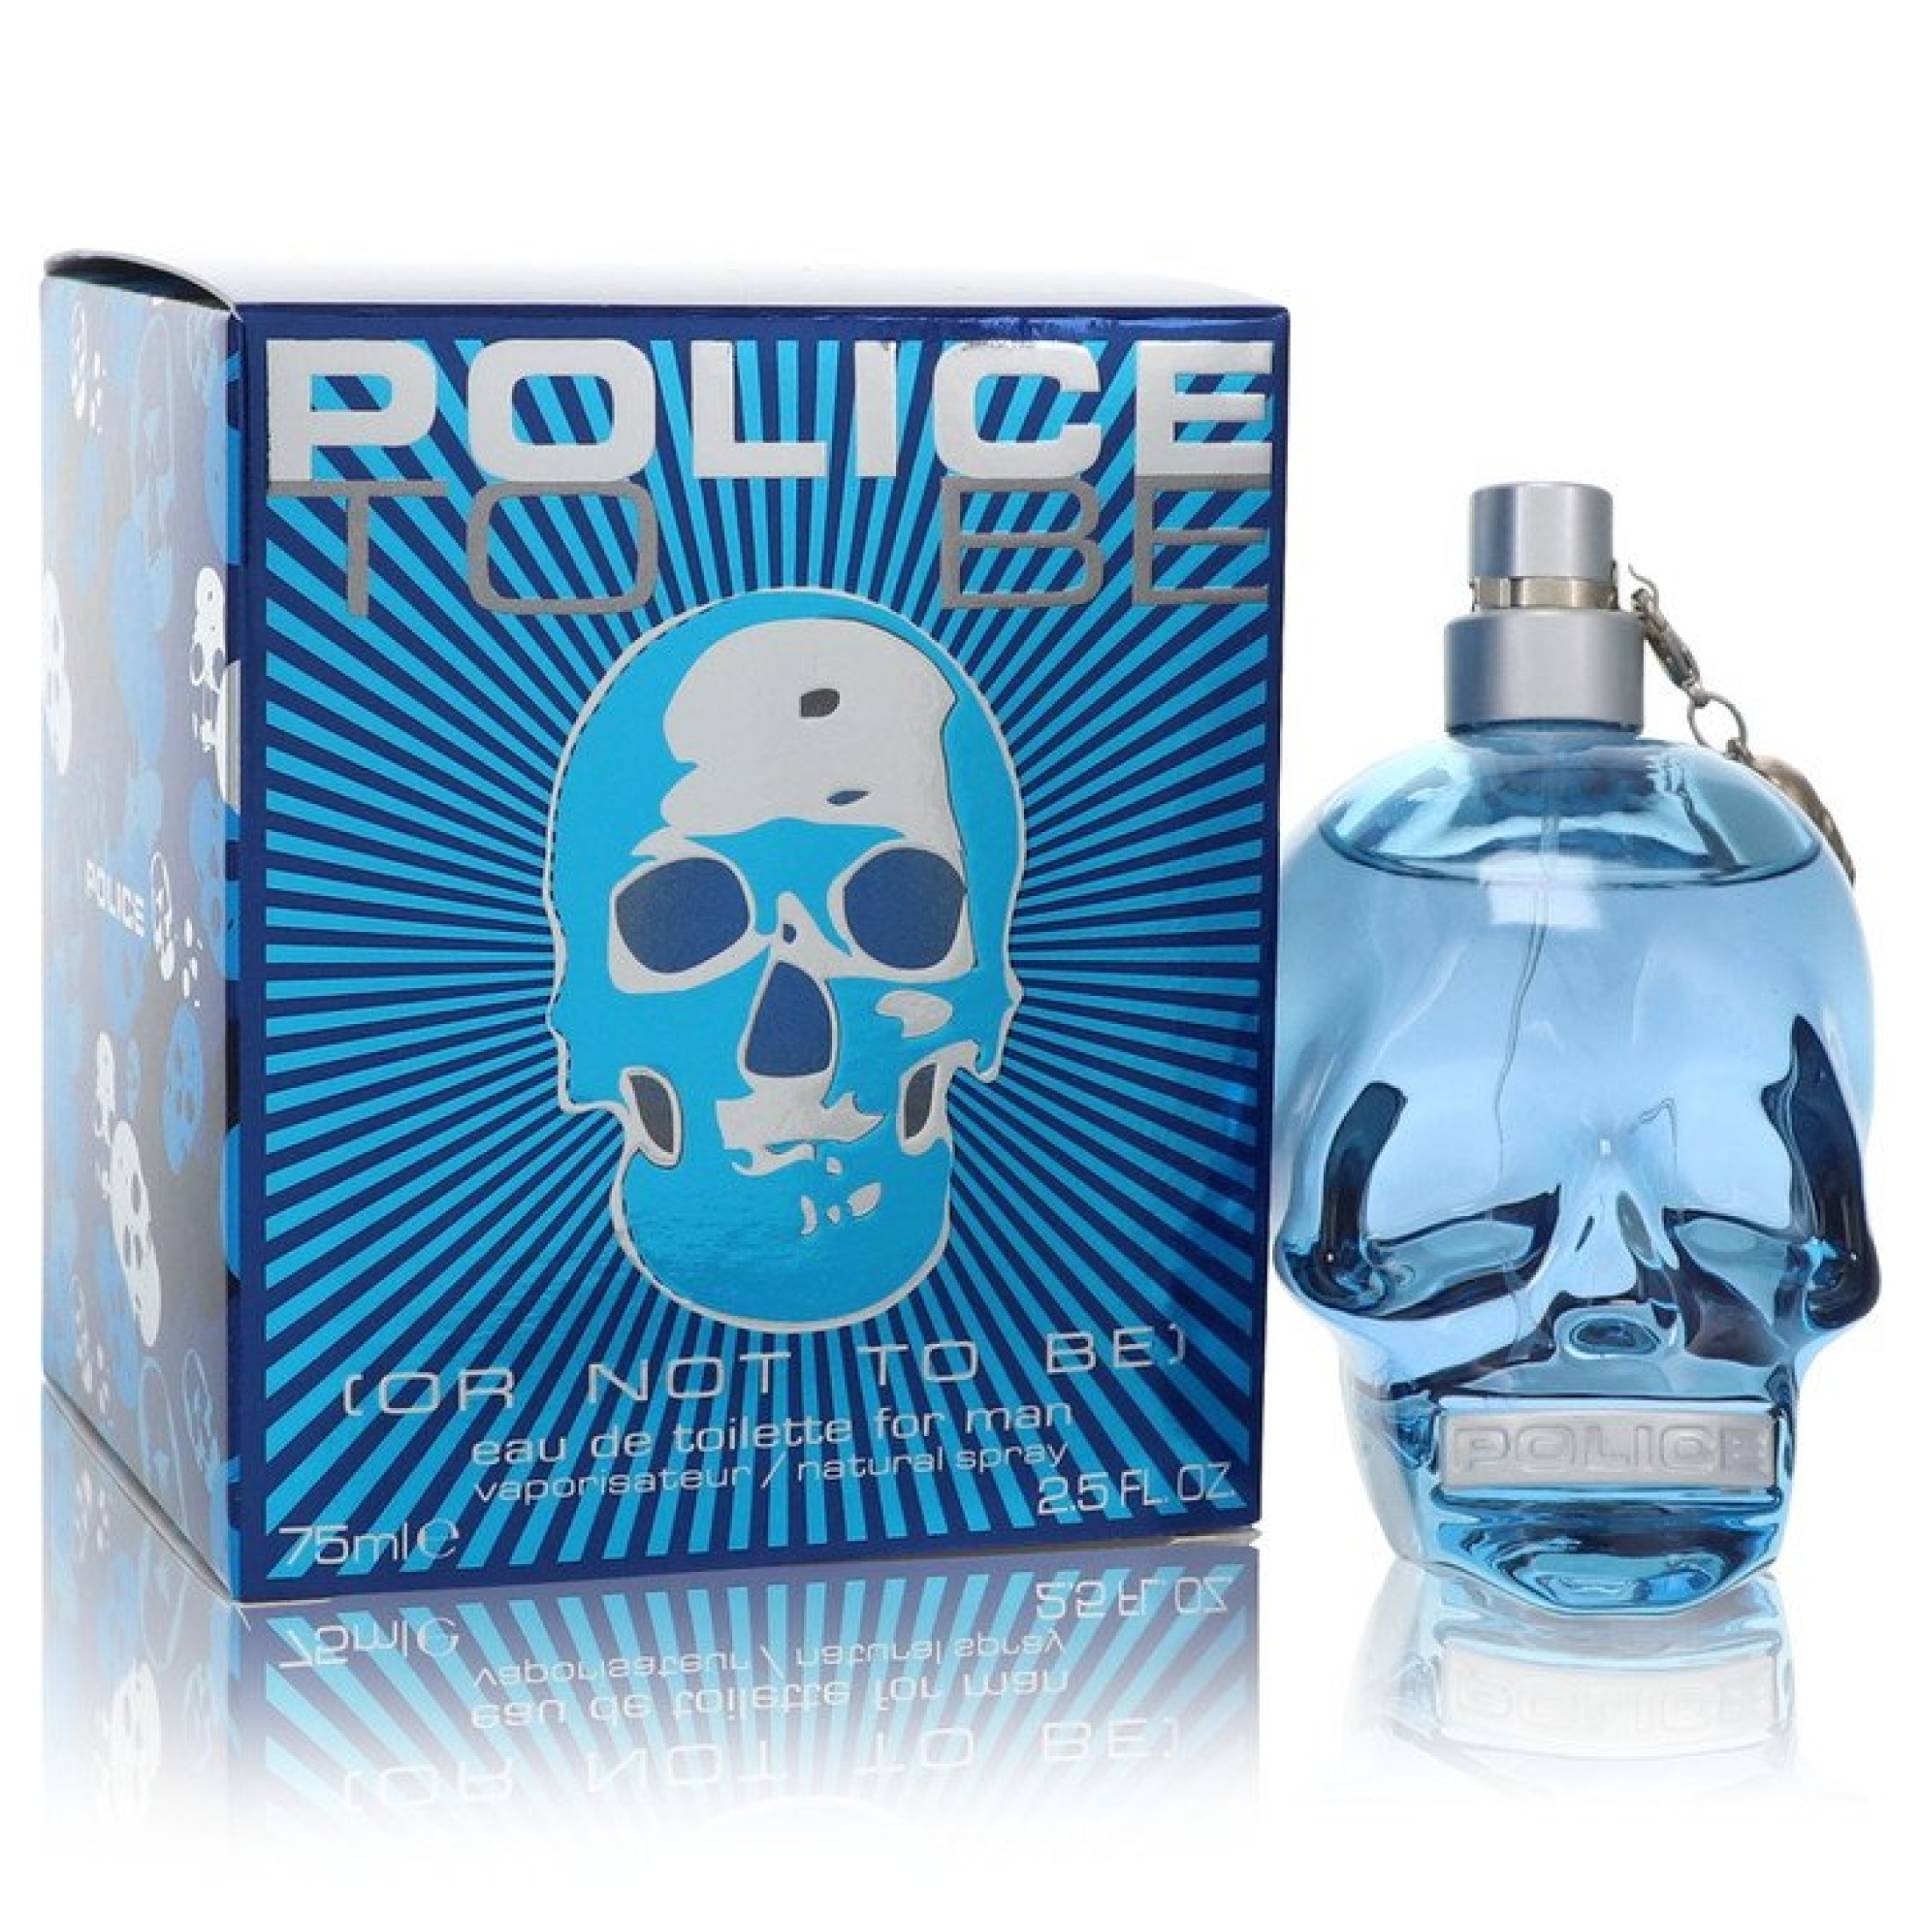 Police Colognes Police To Be or Not To Be Eau De Toilette Spray 75 ml von Police Colognes